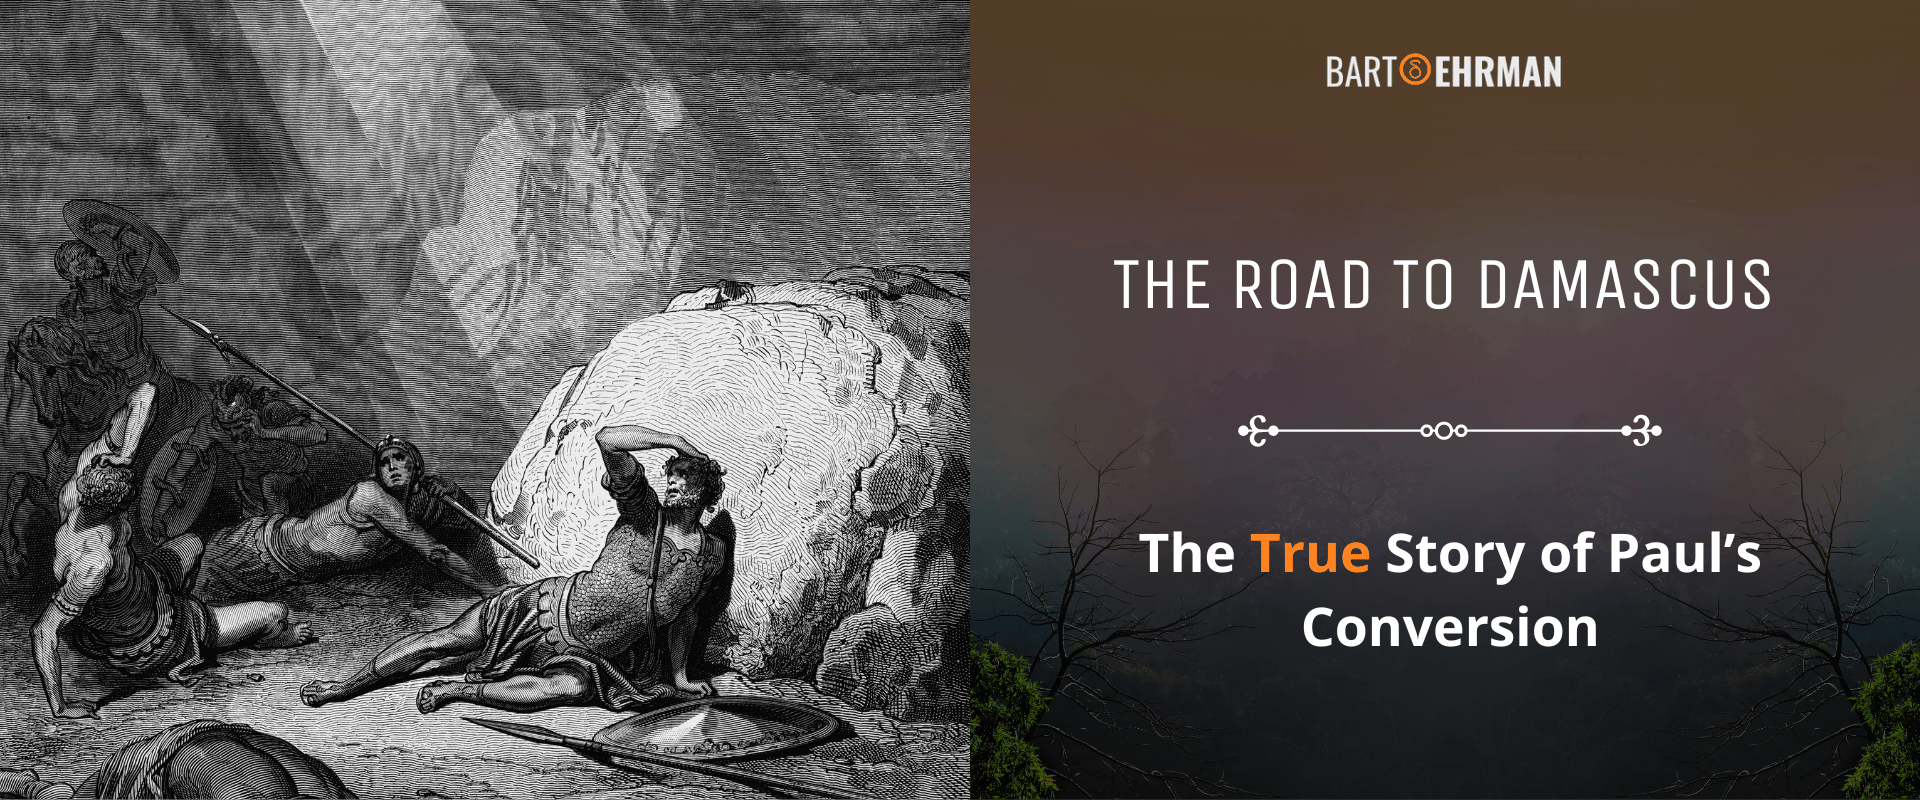 The Road to Damascus - The True Story of Paul’s Conversion